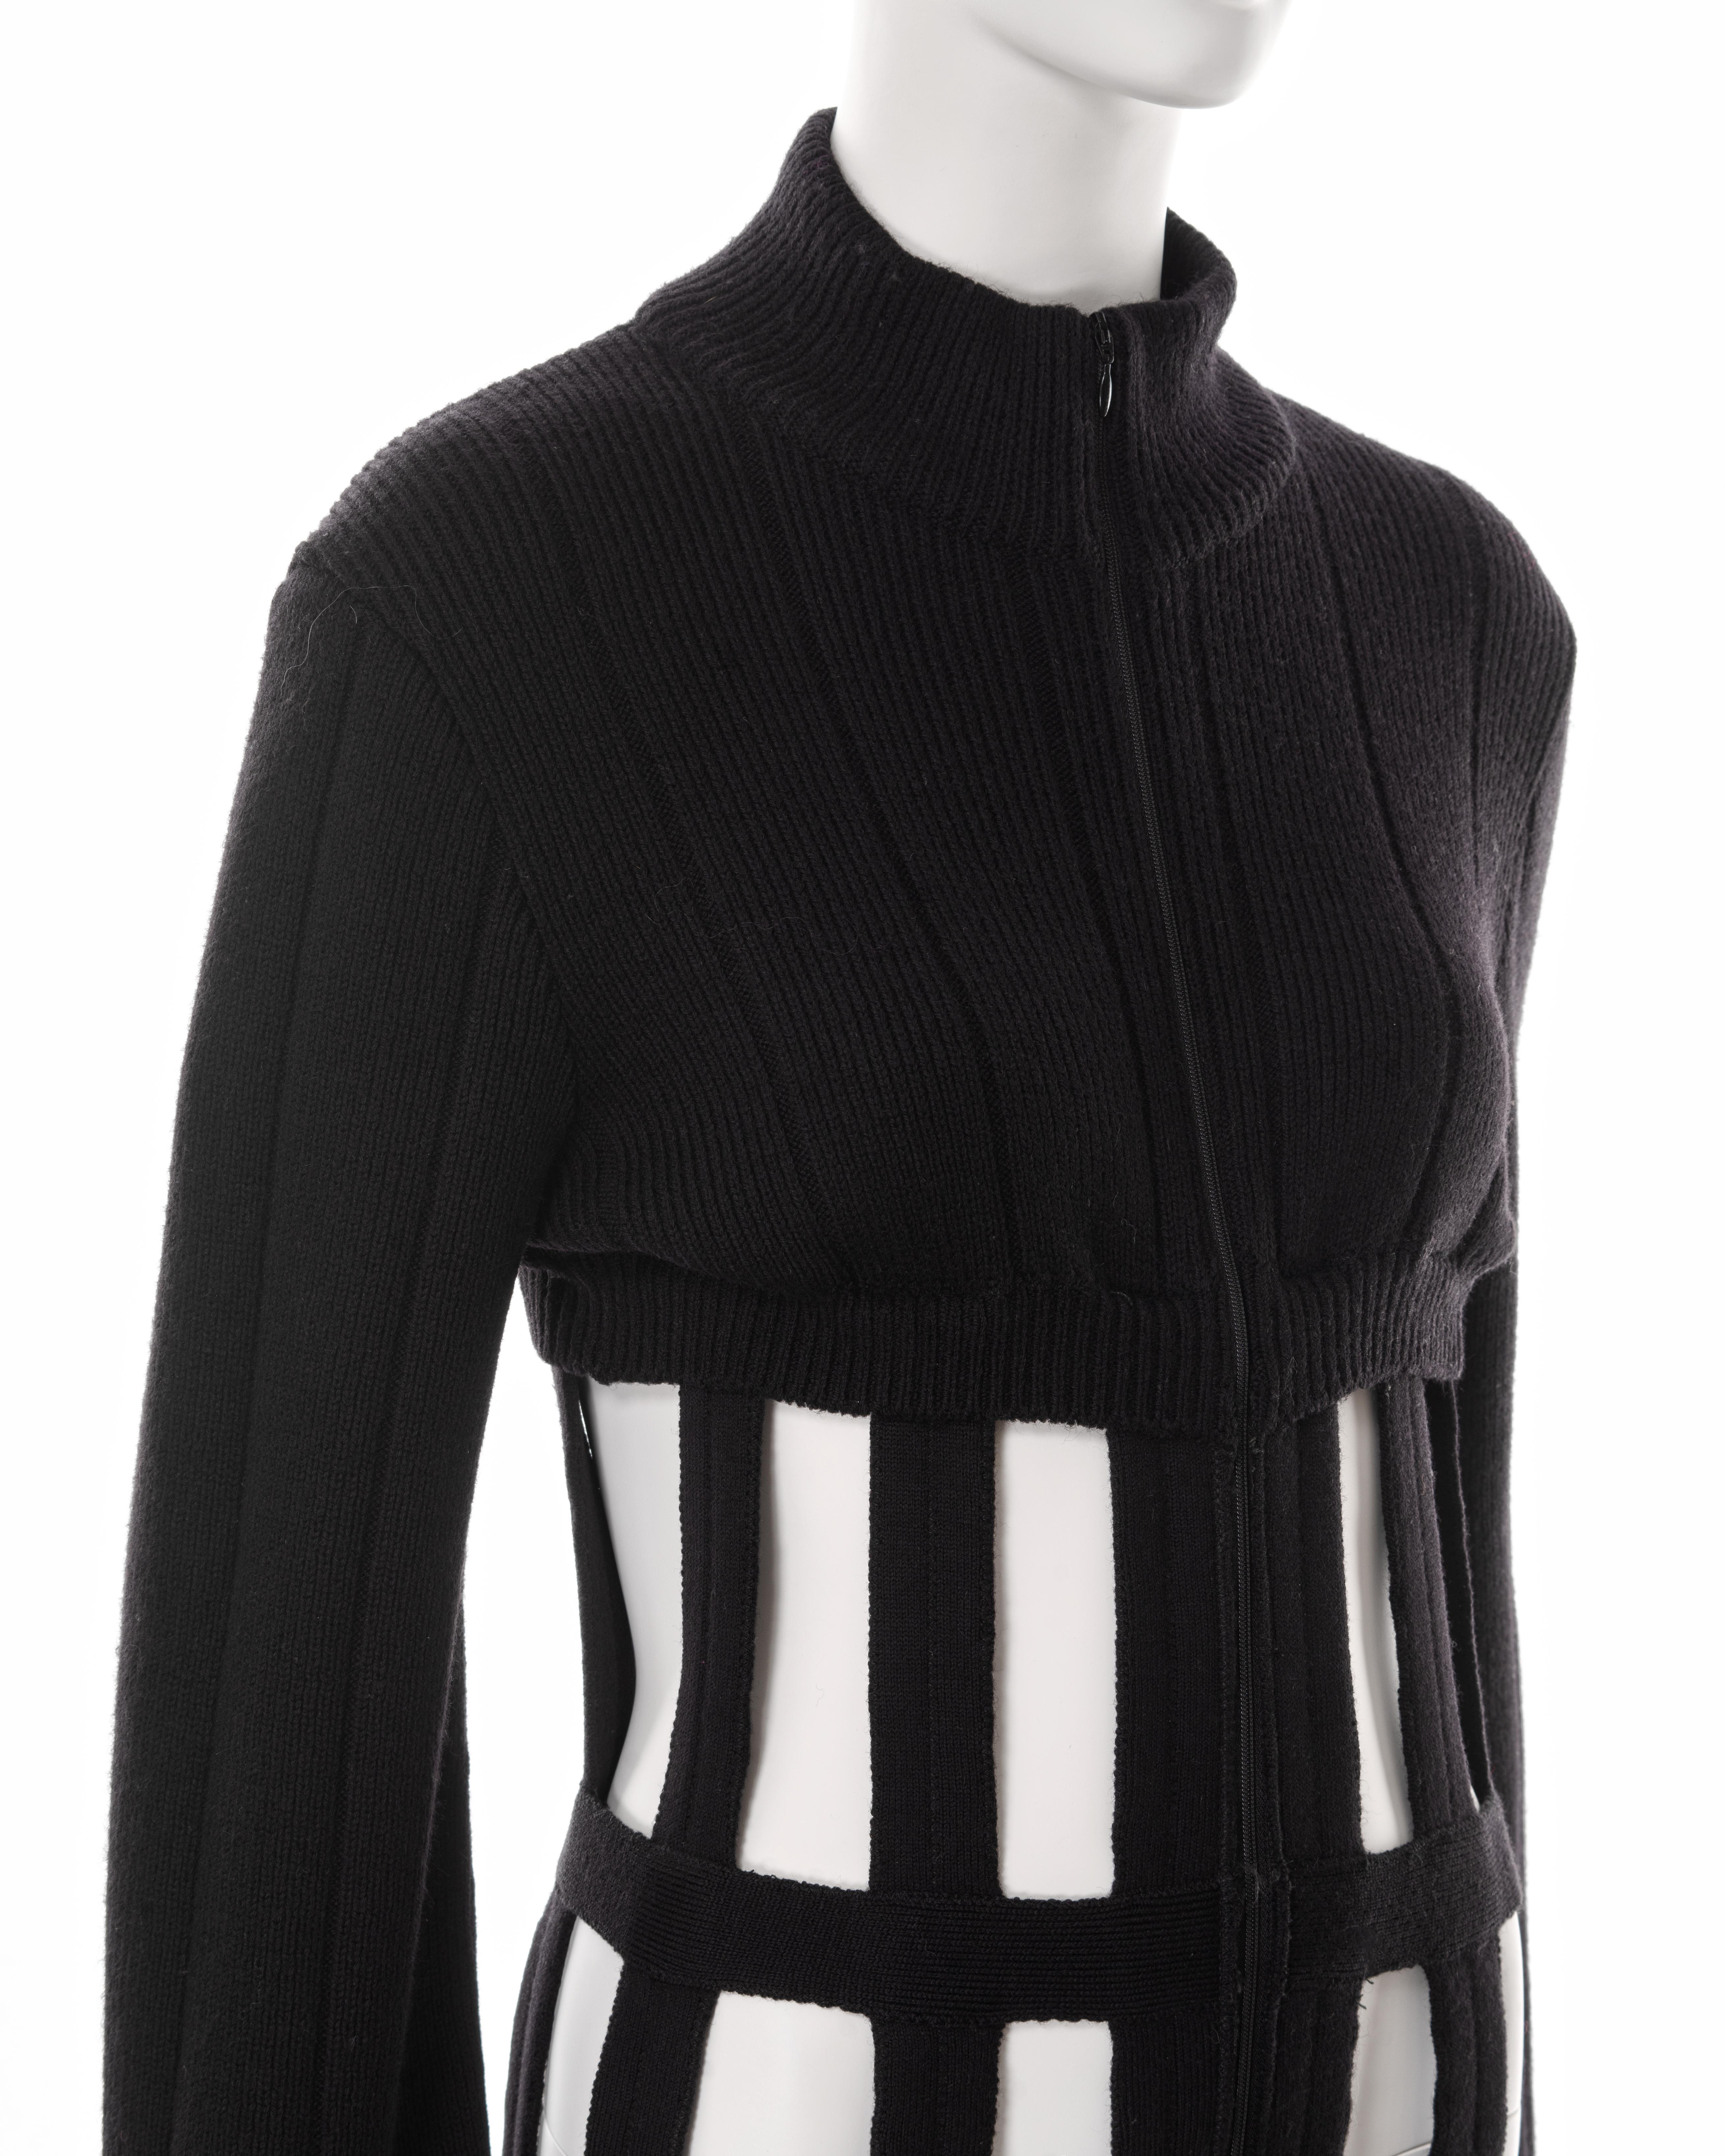 Jean Paul Gaultier black knitted wool caged corset sweater dress, fw 1989 For Sale 3